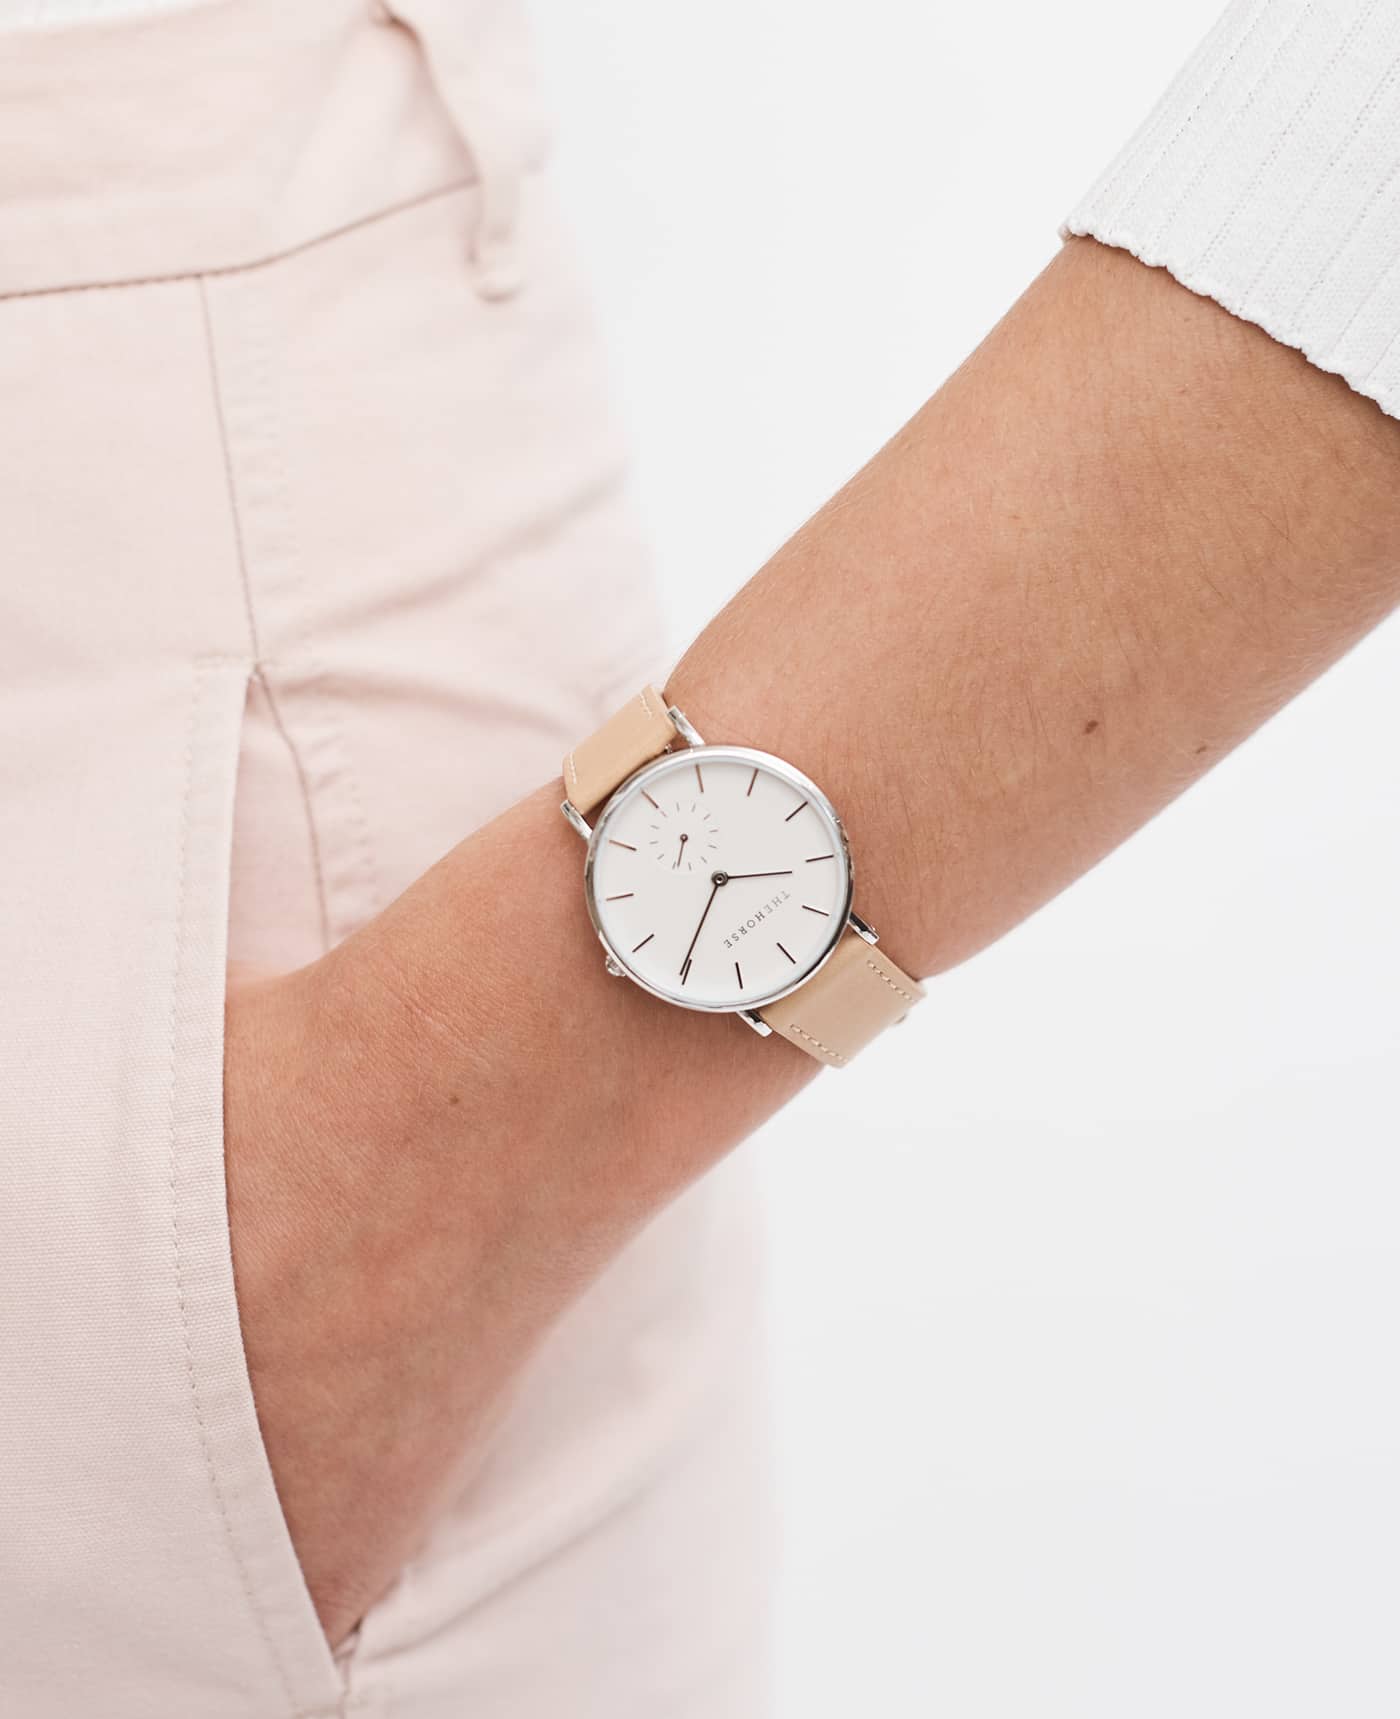 THE HORSE // The Classic SILVER / WHITE DIAL / NUDE LEATHER